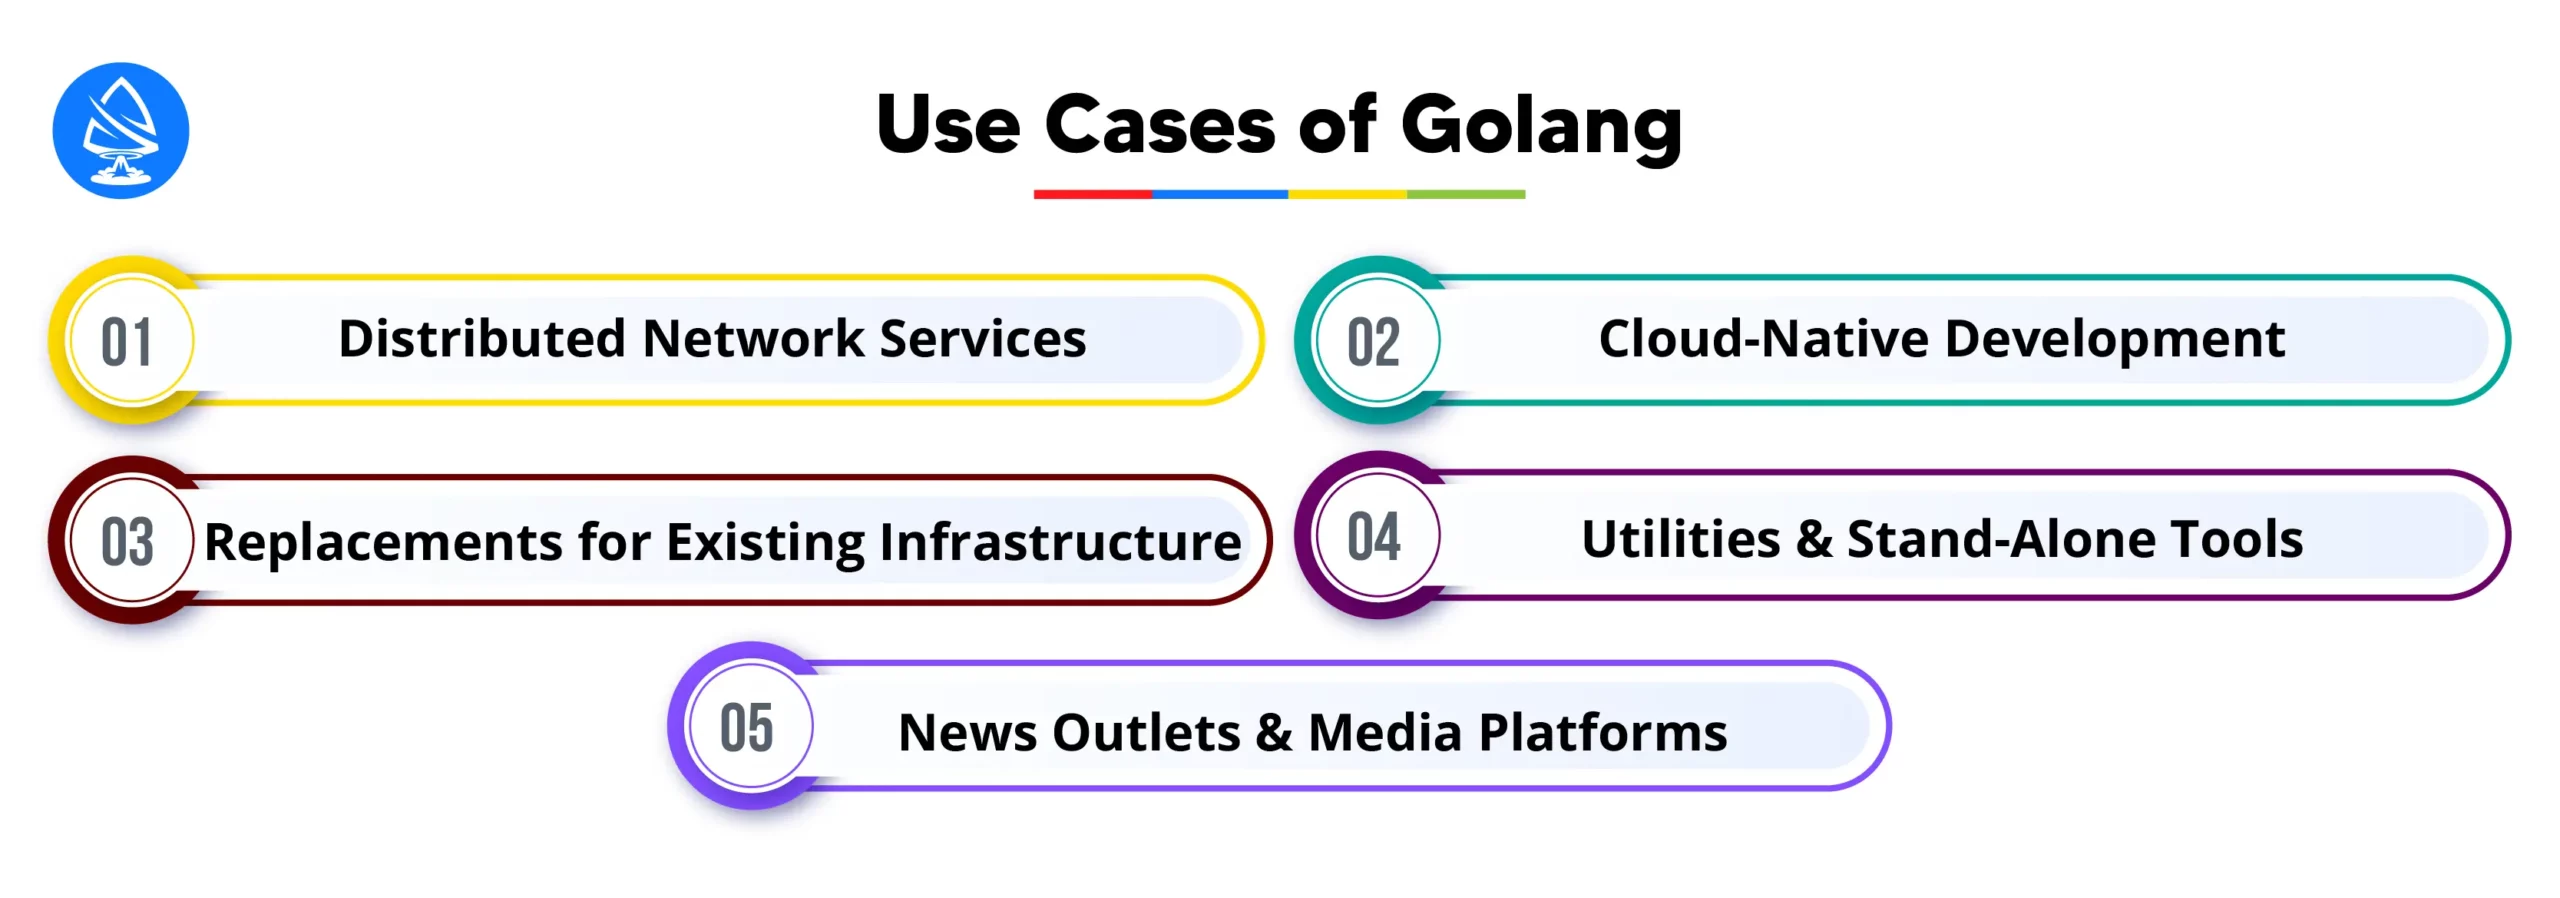 Main Use Cases of Golang 